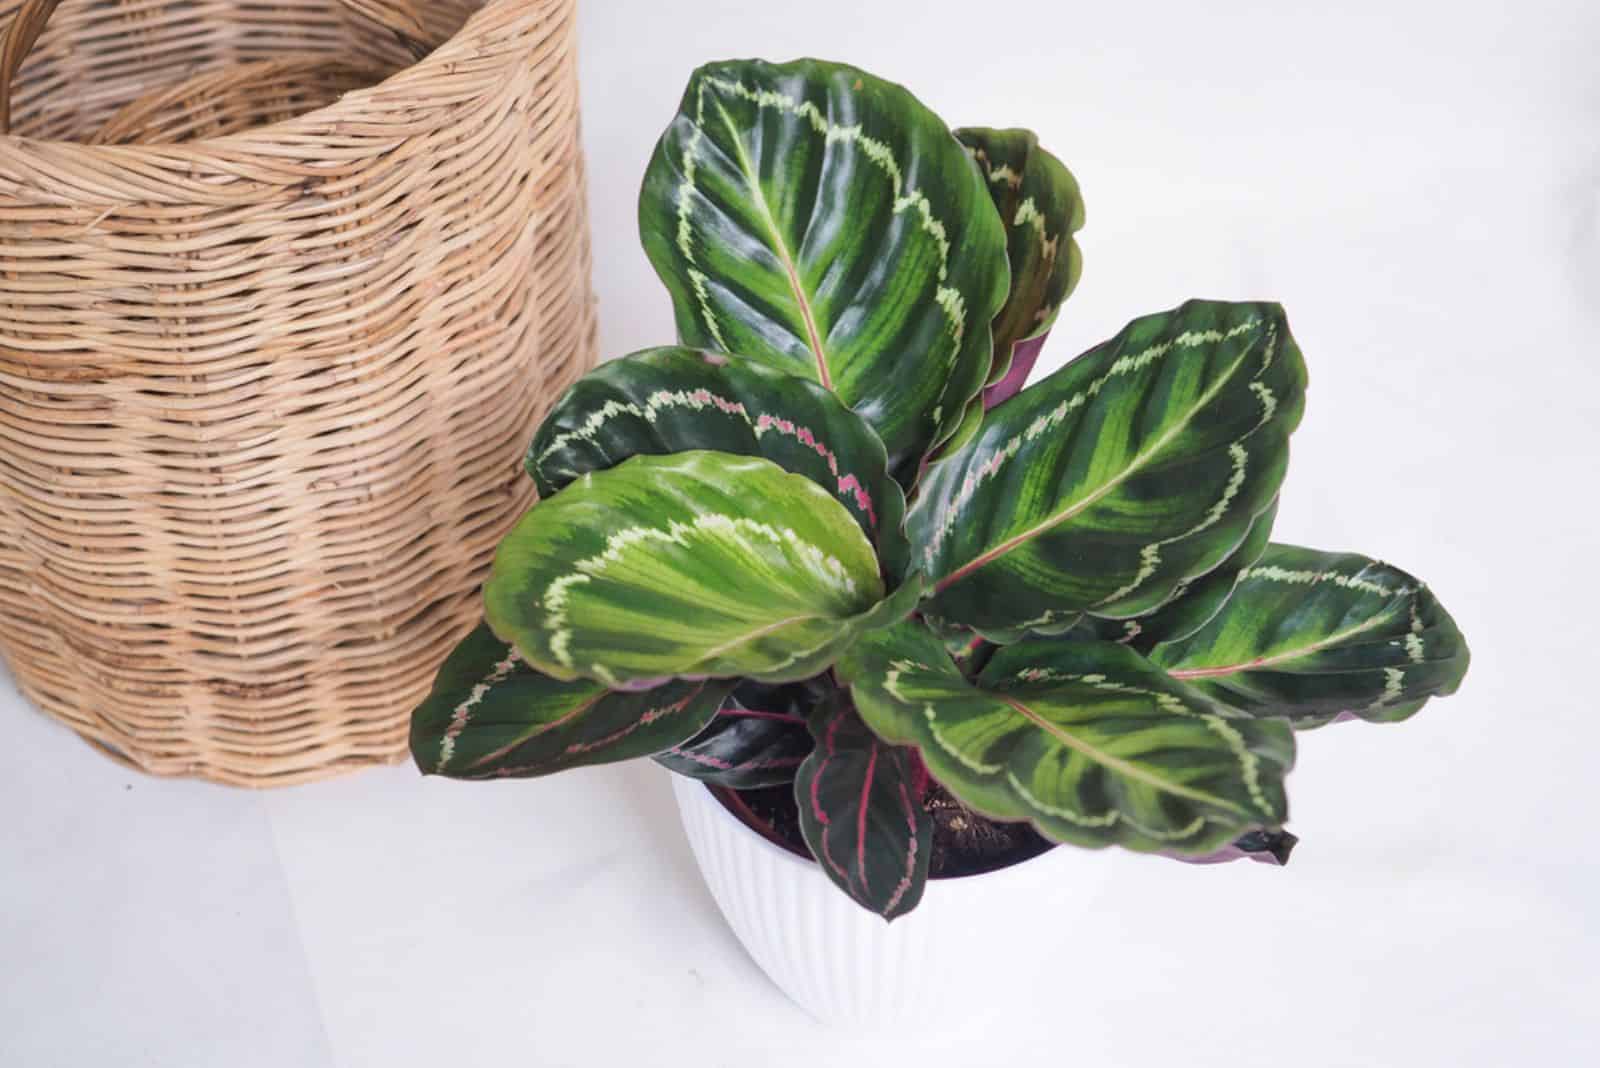 Calathea Roseopicta in white pot with wooden basket